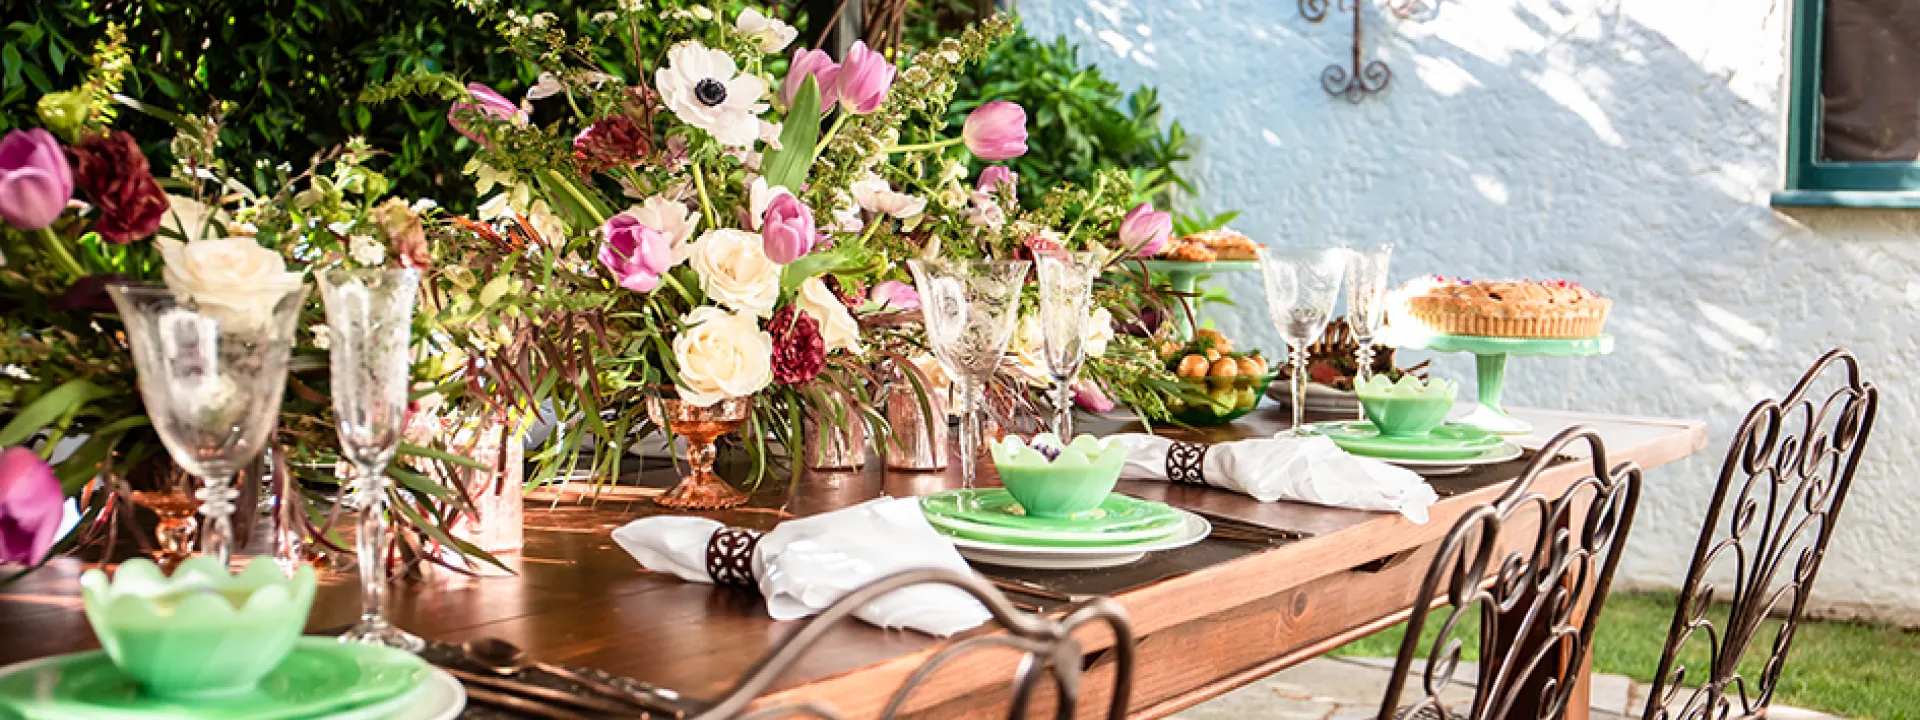 Garden party table setting how to 